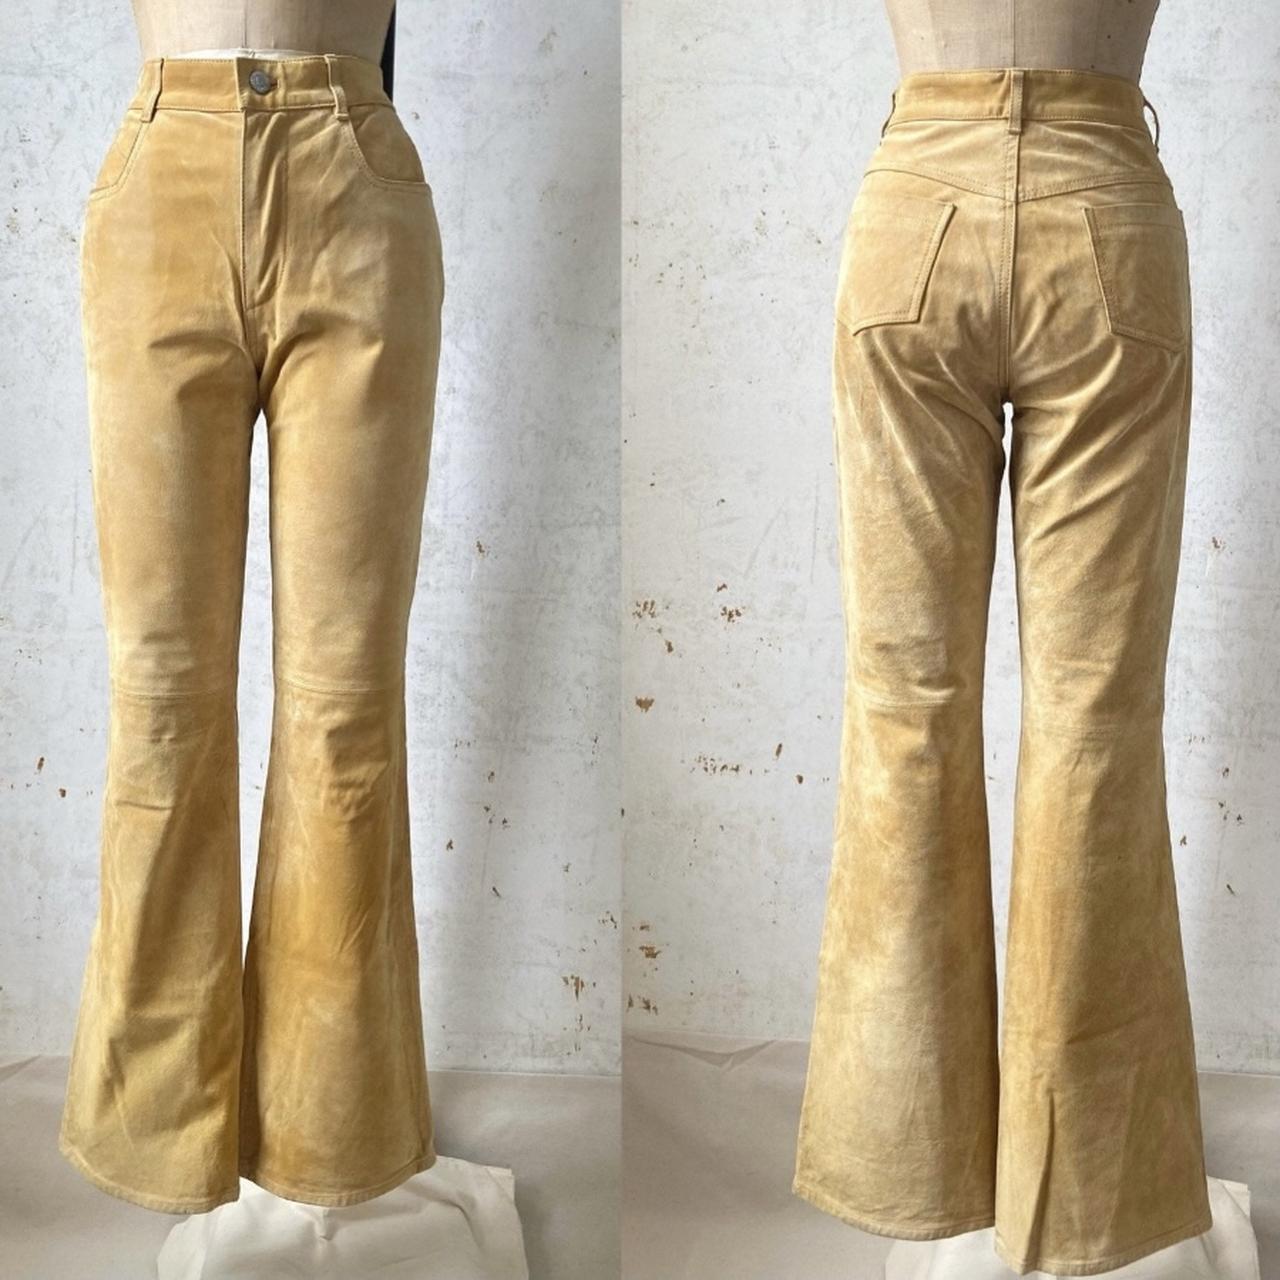 Bell Bottoms pants, very popular in the late 50's and the 60's